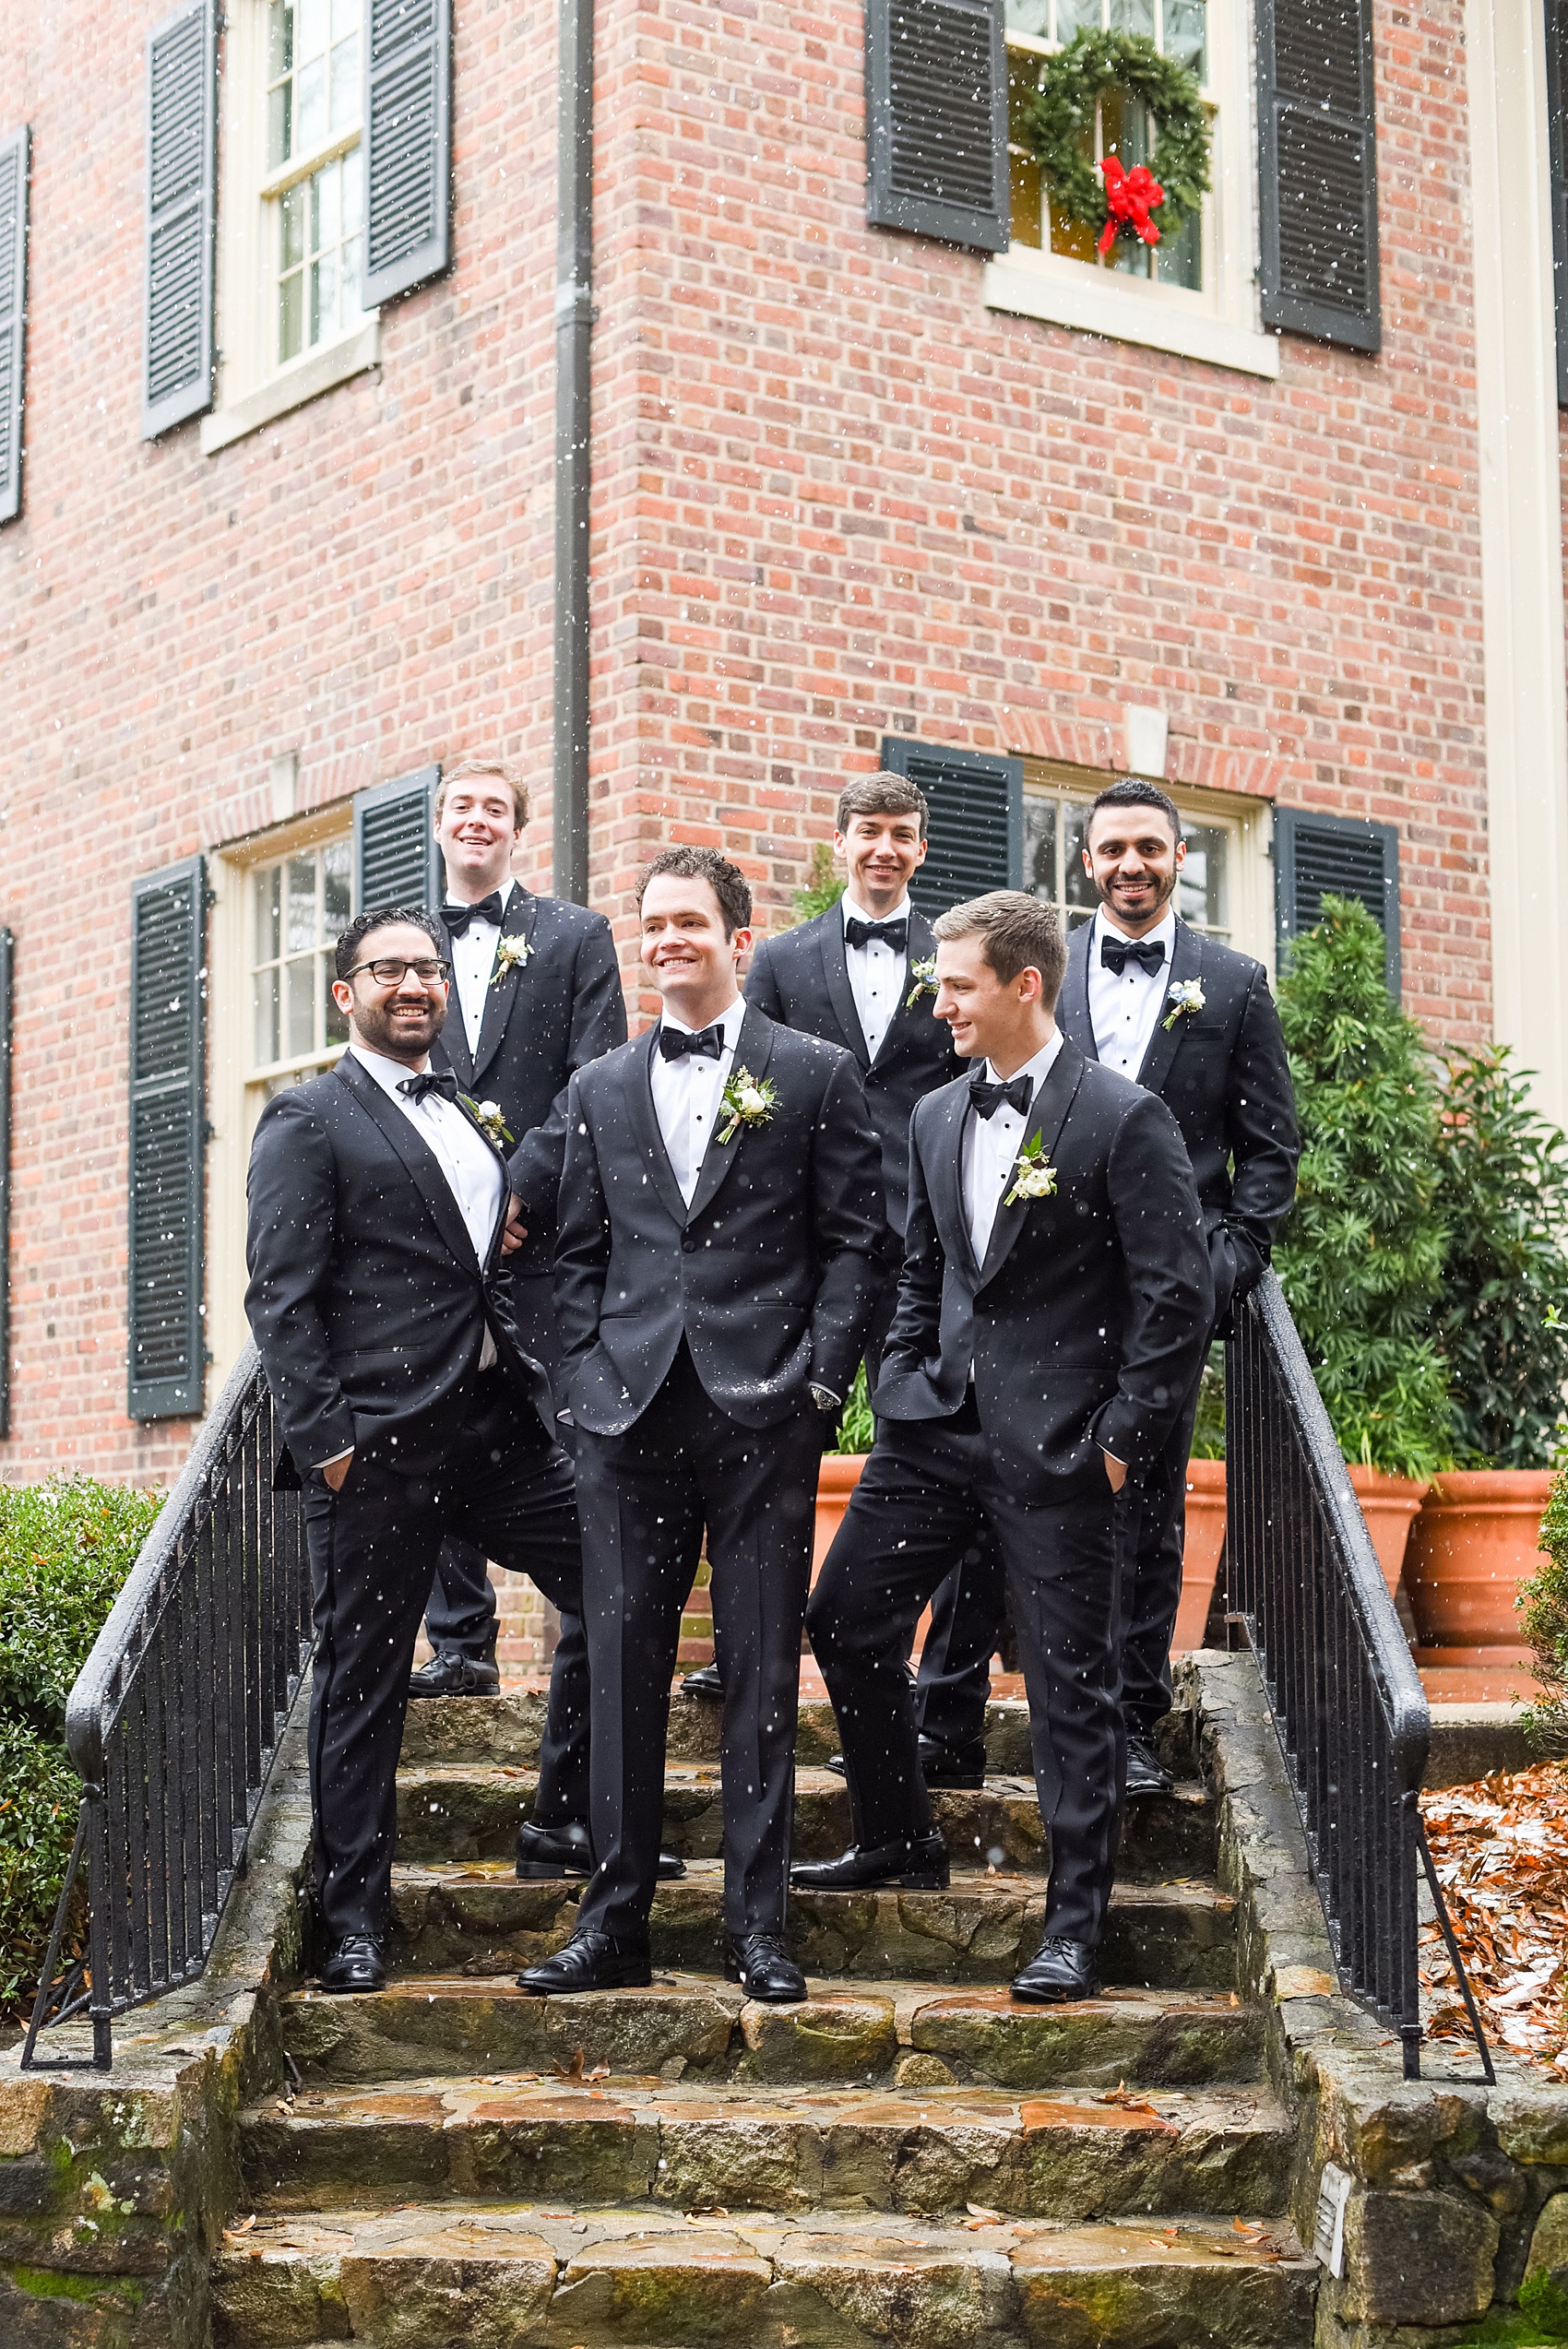 Beautiful wedding photos at The Carolina Inn at Chapel Hill, North Carolina by Mikkel Paige Photography. Photo of the groomsmen in the snow in classic black tuxedos and bow ties. Click through to see the rest of this gorgeous winter wedding! #thecarolinainn #snowywedding